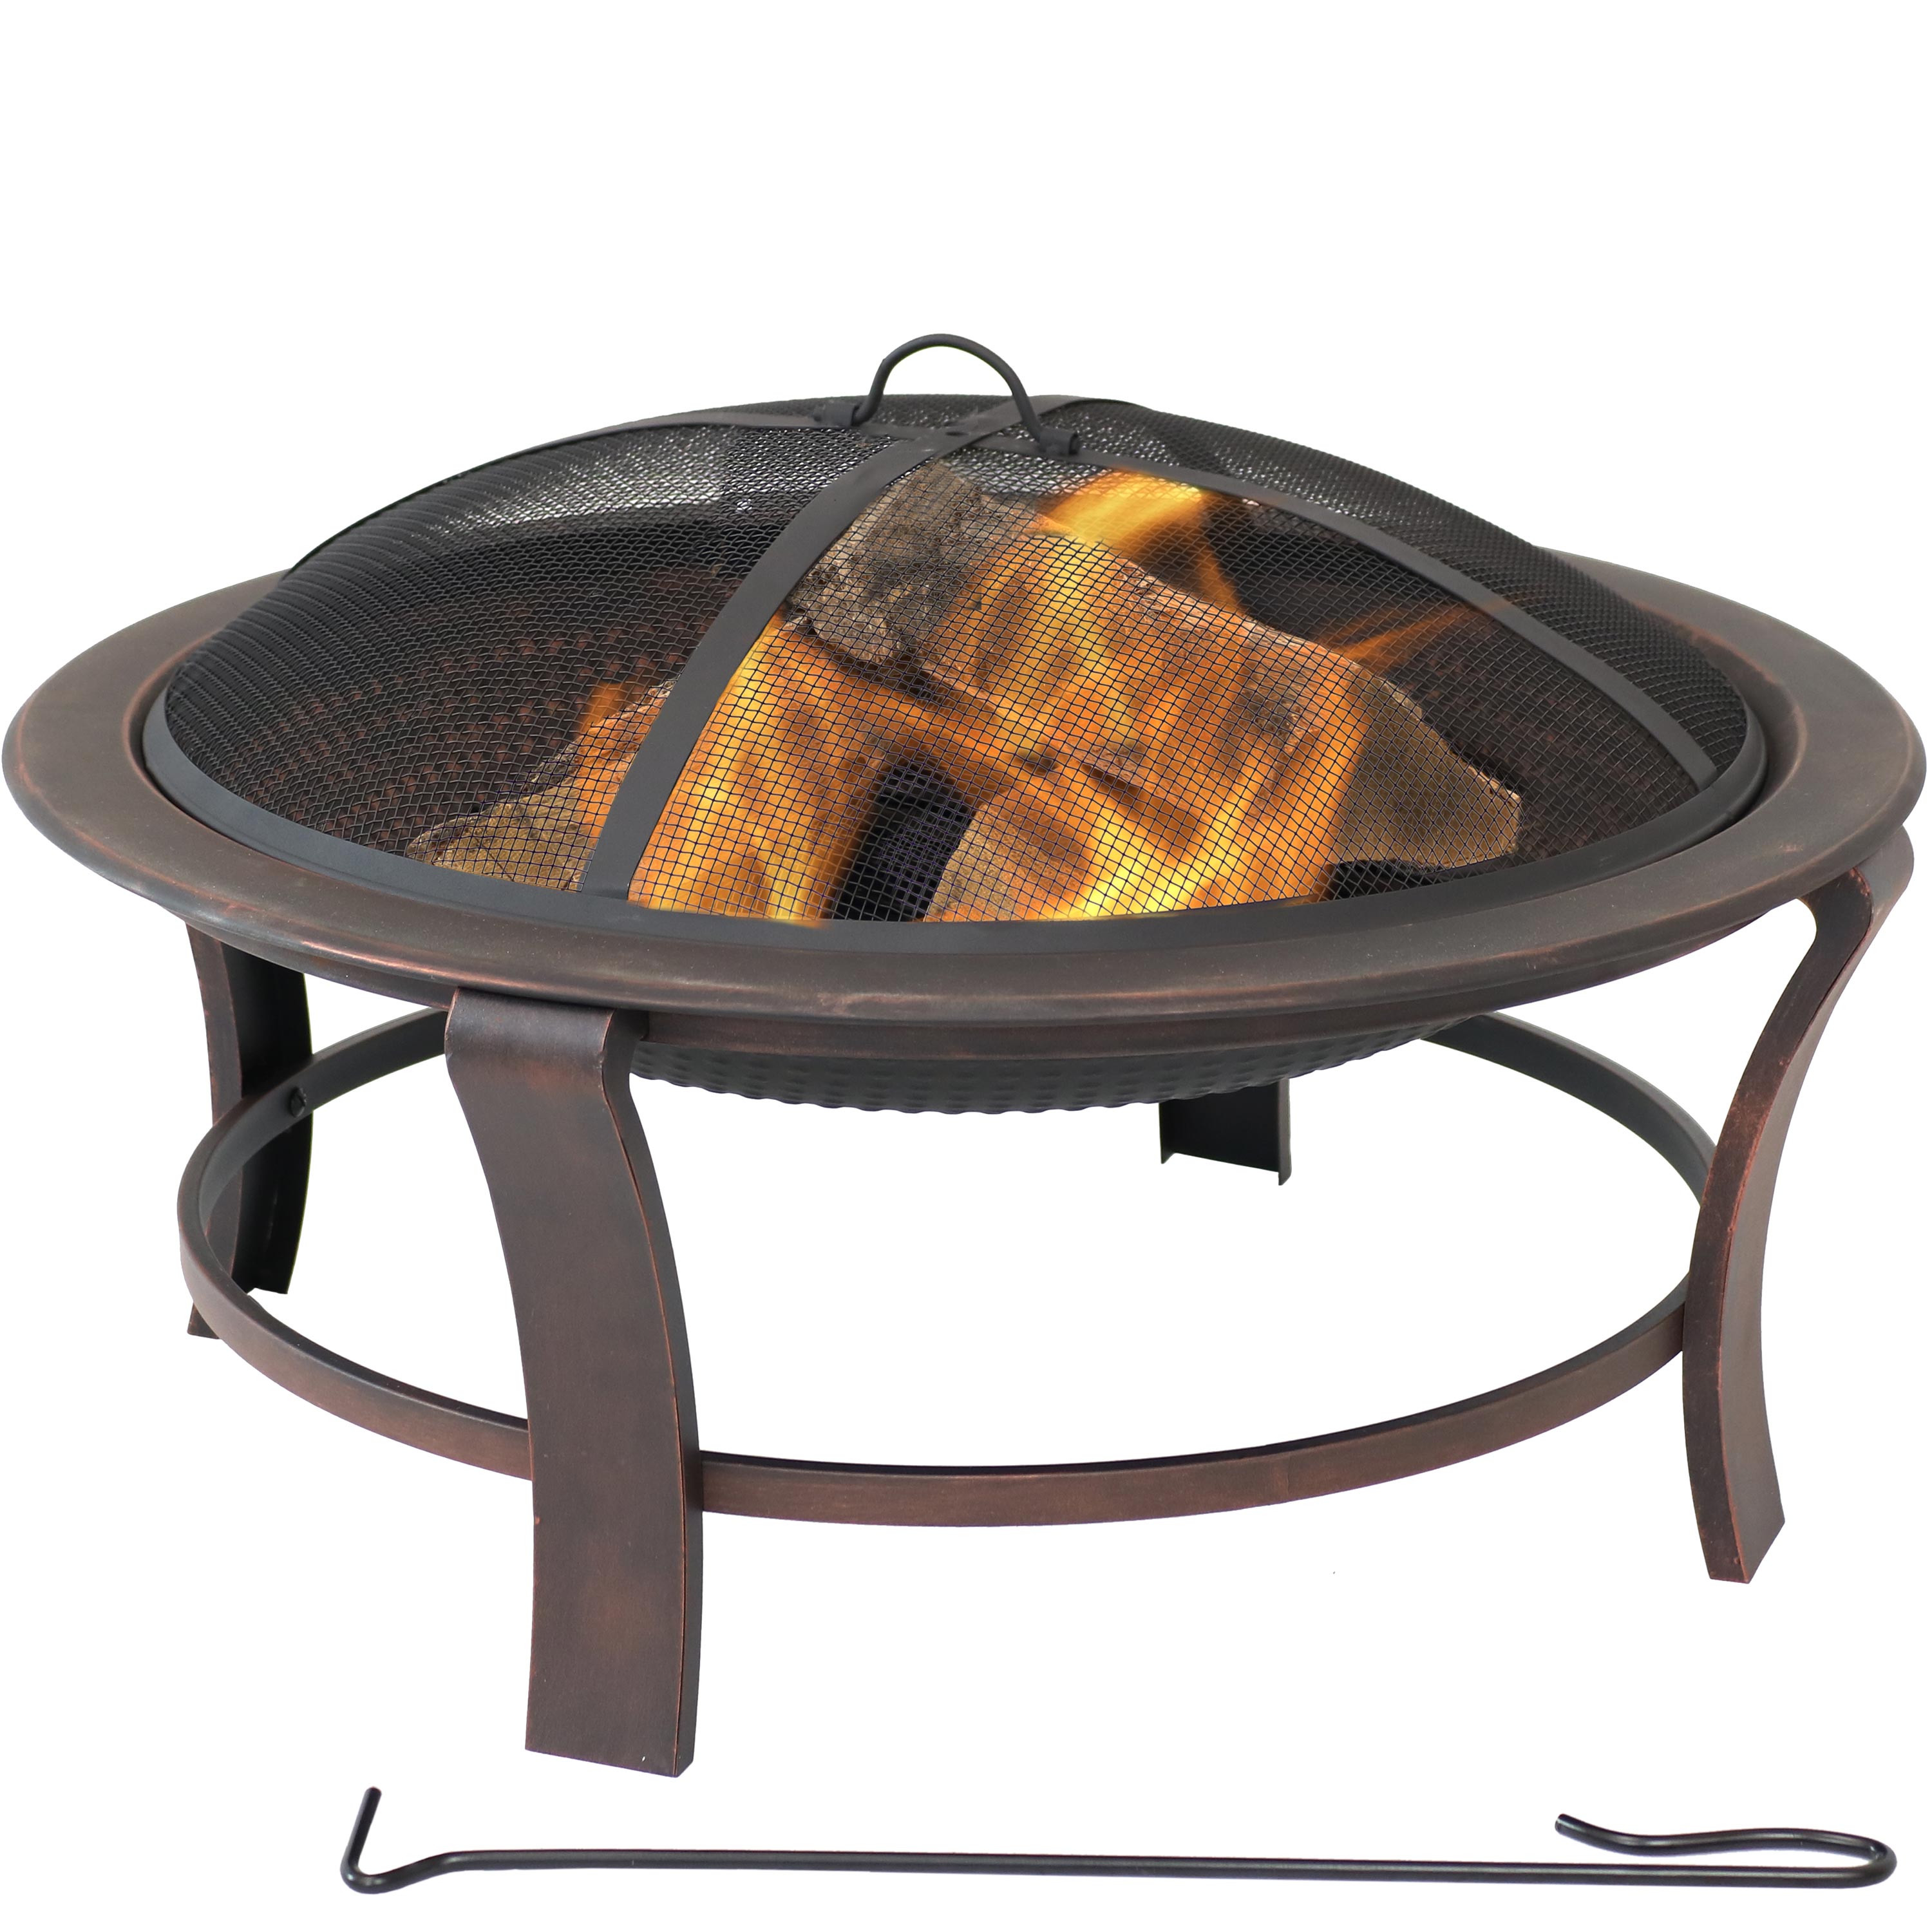 Bronze Steel Wood Burning Fire Pit, Uniflame Fire Pit Reviews